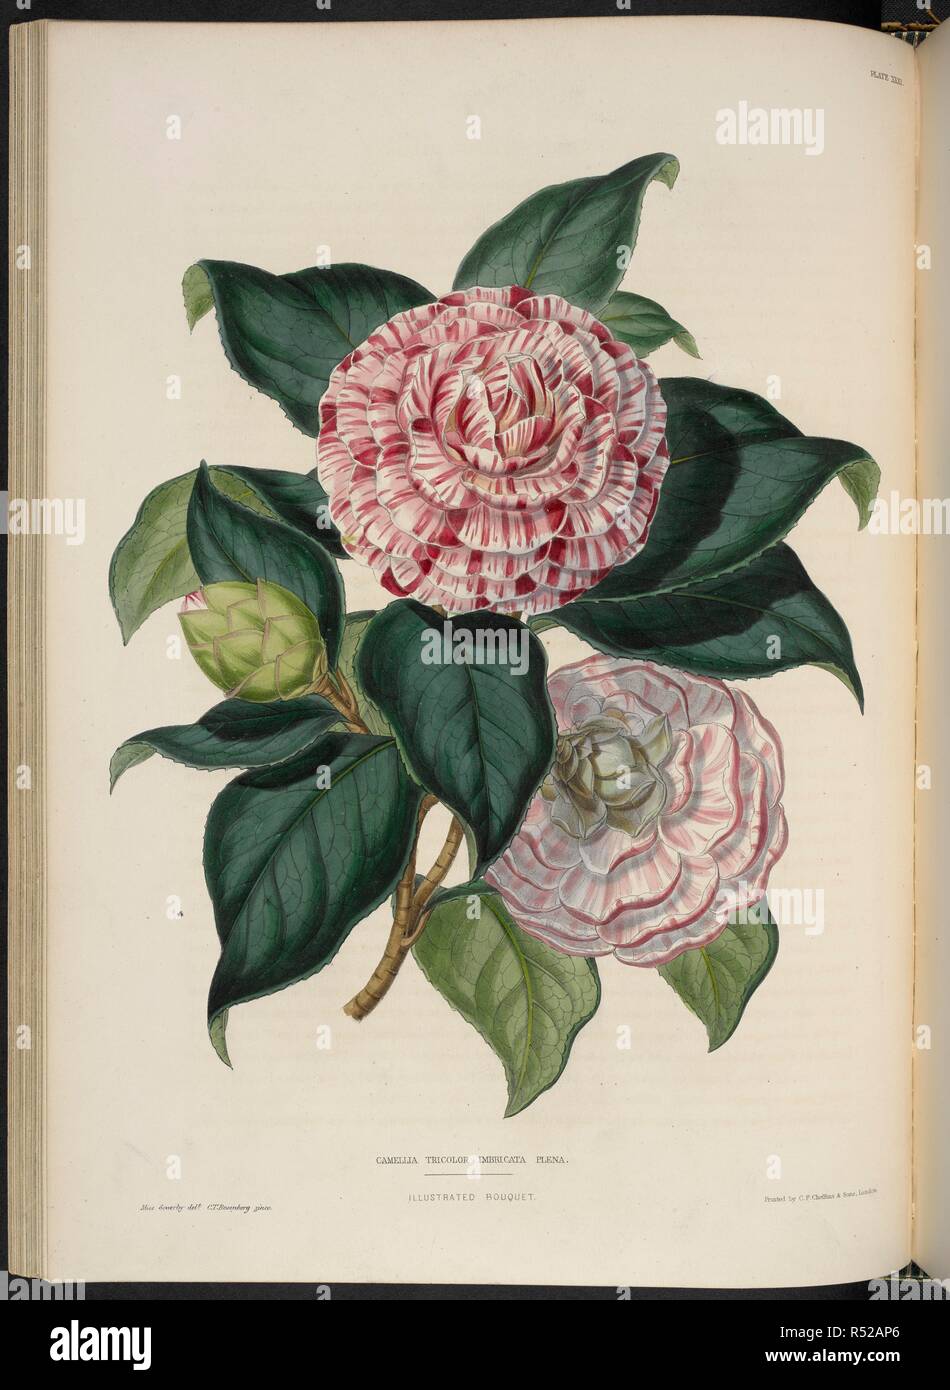 Camellia Tricolor Imbricata Plena.  . The Illustrated Bouquet, consisting of figures, with descriptions of new flowers. London, 1857-64. Source: 1823.c.13 plate 31. Author: Henderson, Edward George. Sowerby, Miss. Stock Photo